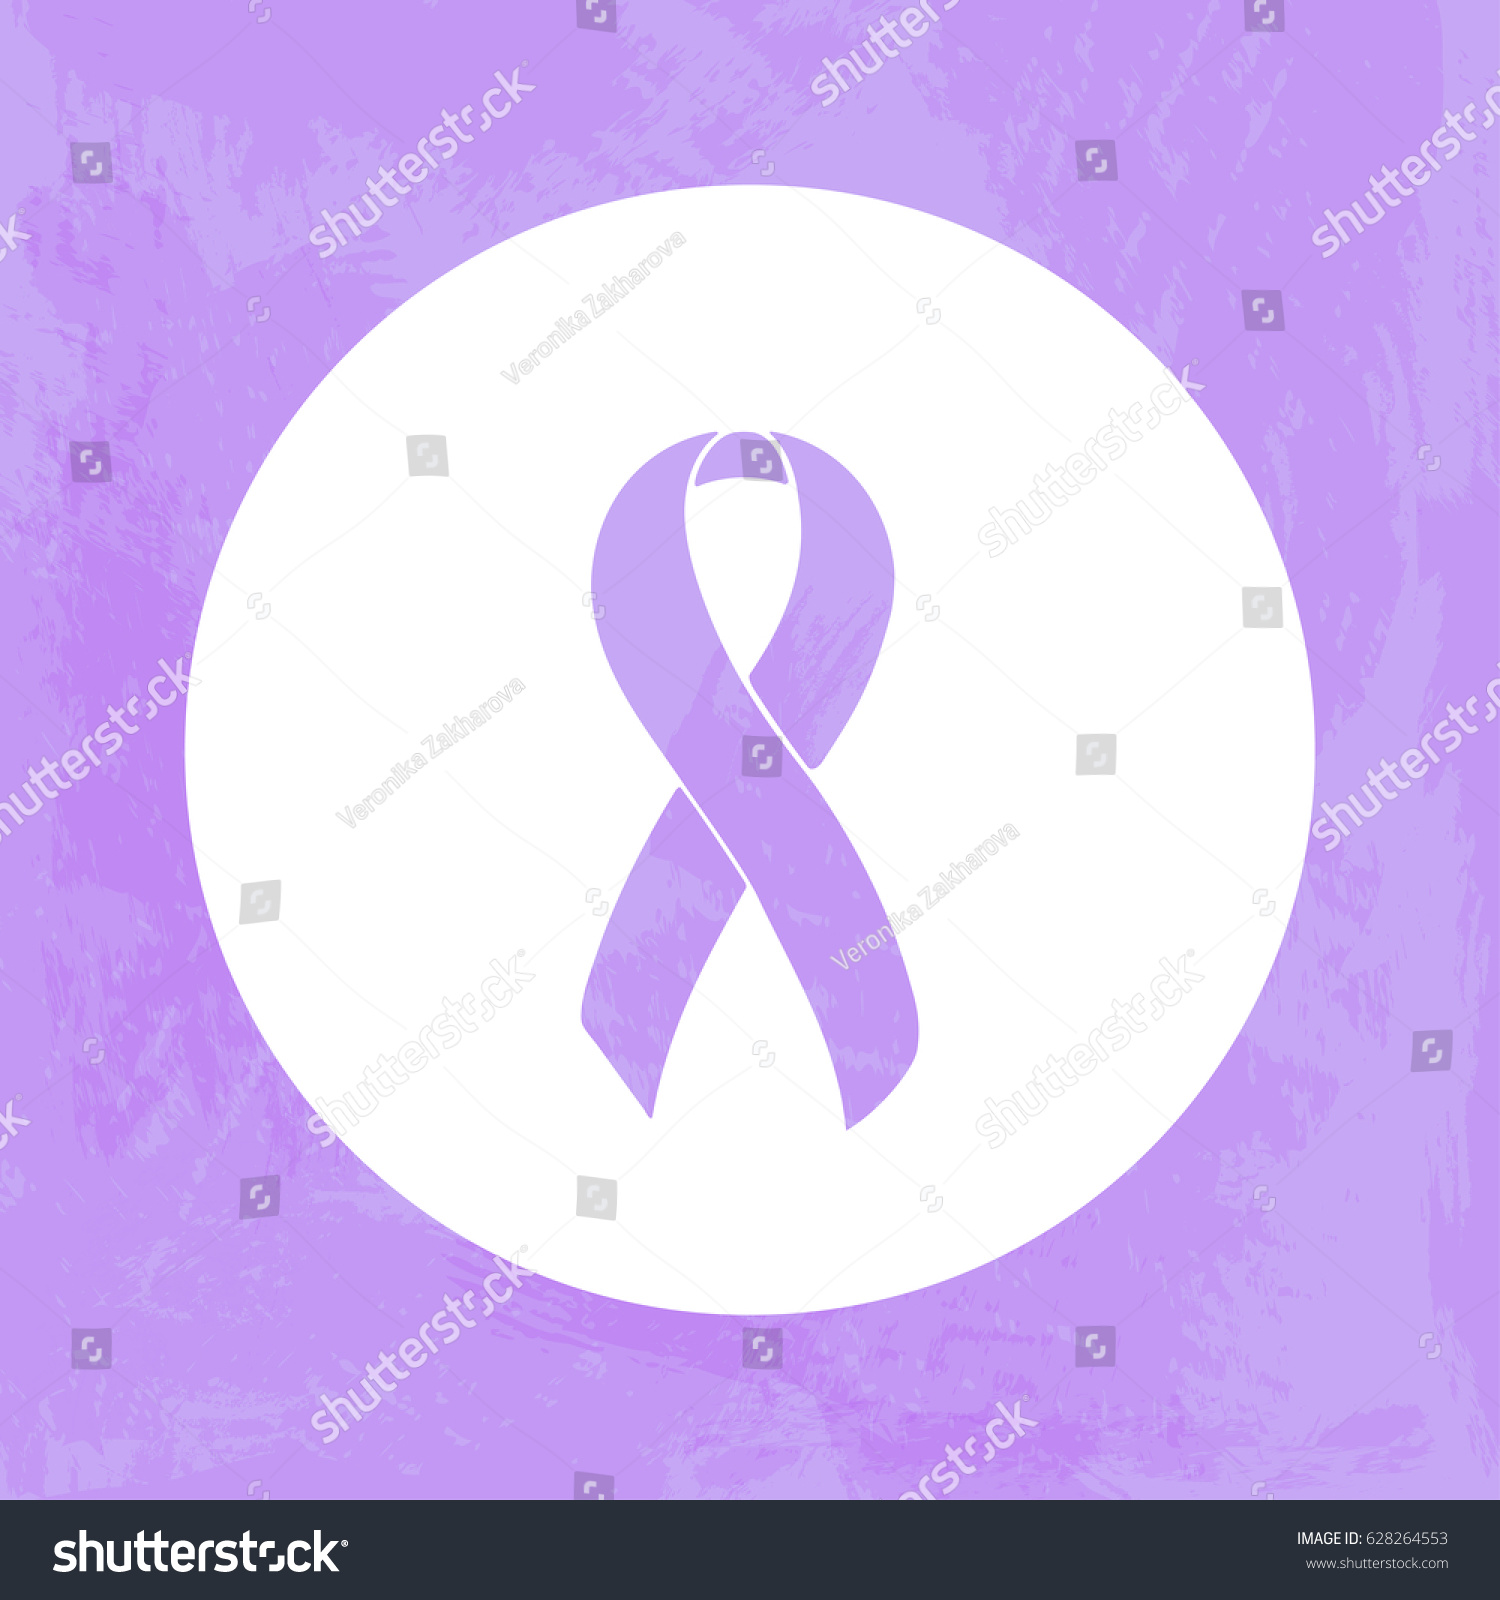 SVG of Lavender Awareness Ribbon. Craniosynostosis, Epilepsy, Gynecological Cancer, Hypokalemic Periodic Paralysis, Infantile Spasms, Rett Syndrome. Isolated icon. Watercolor painted background svg